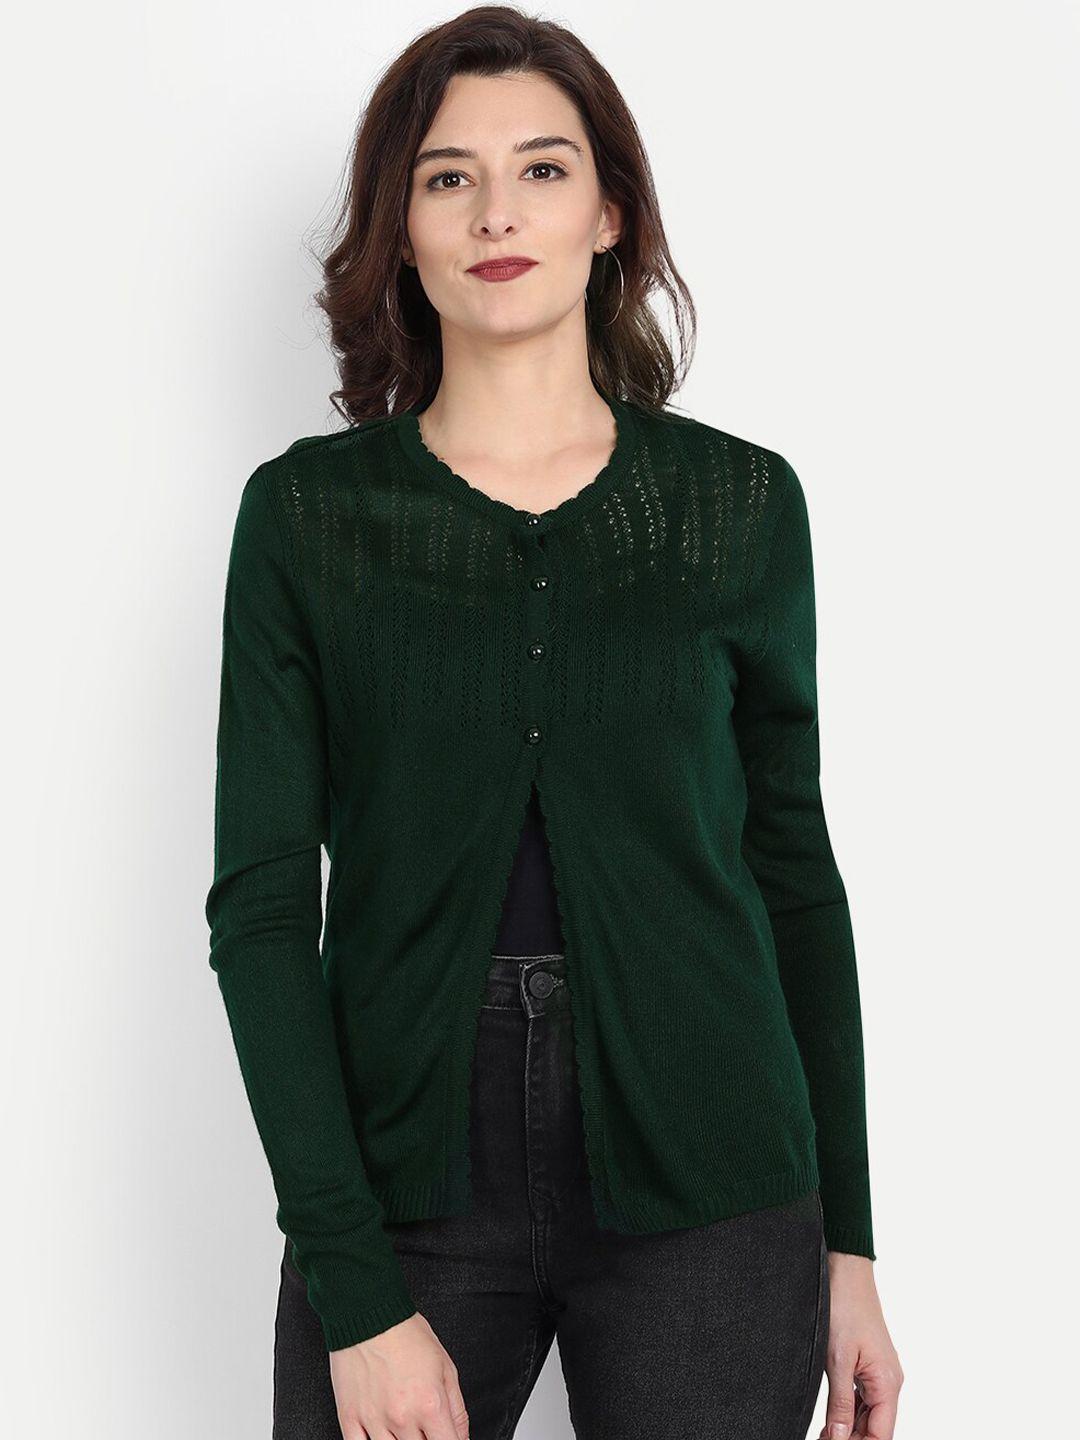 clapton women green cable knit woollen cardigan with applique detail